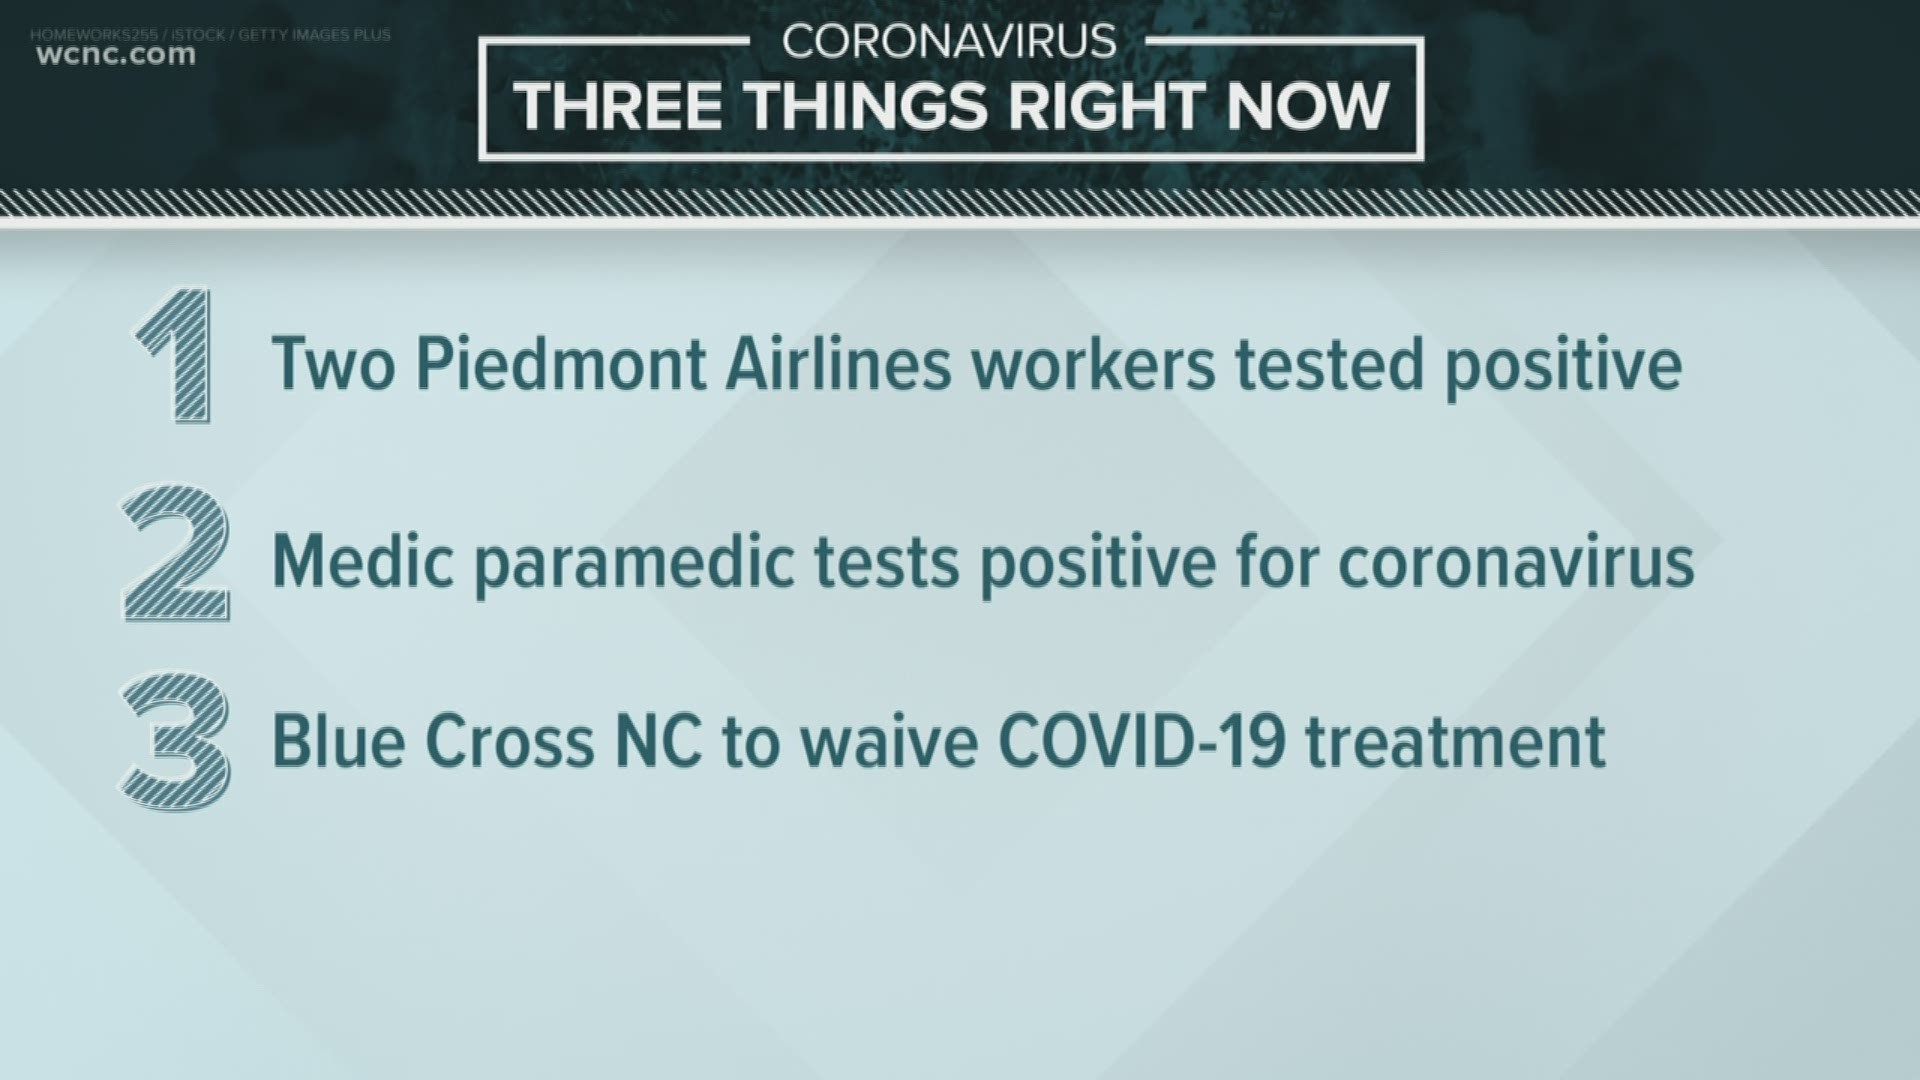 Two Piedmont Airline workers based in Charlotte have tested positive for COVID-19 and two others are self-quarantining, according to a Charlotte union.